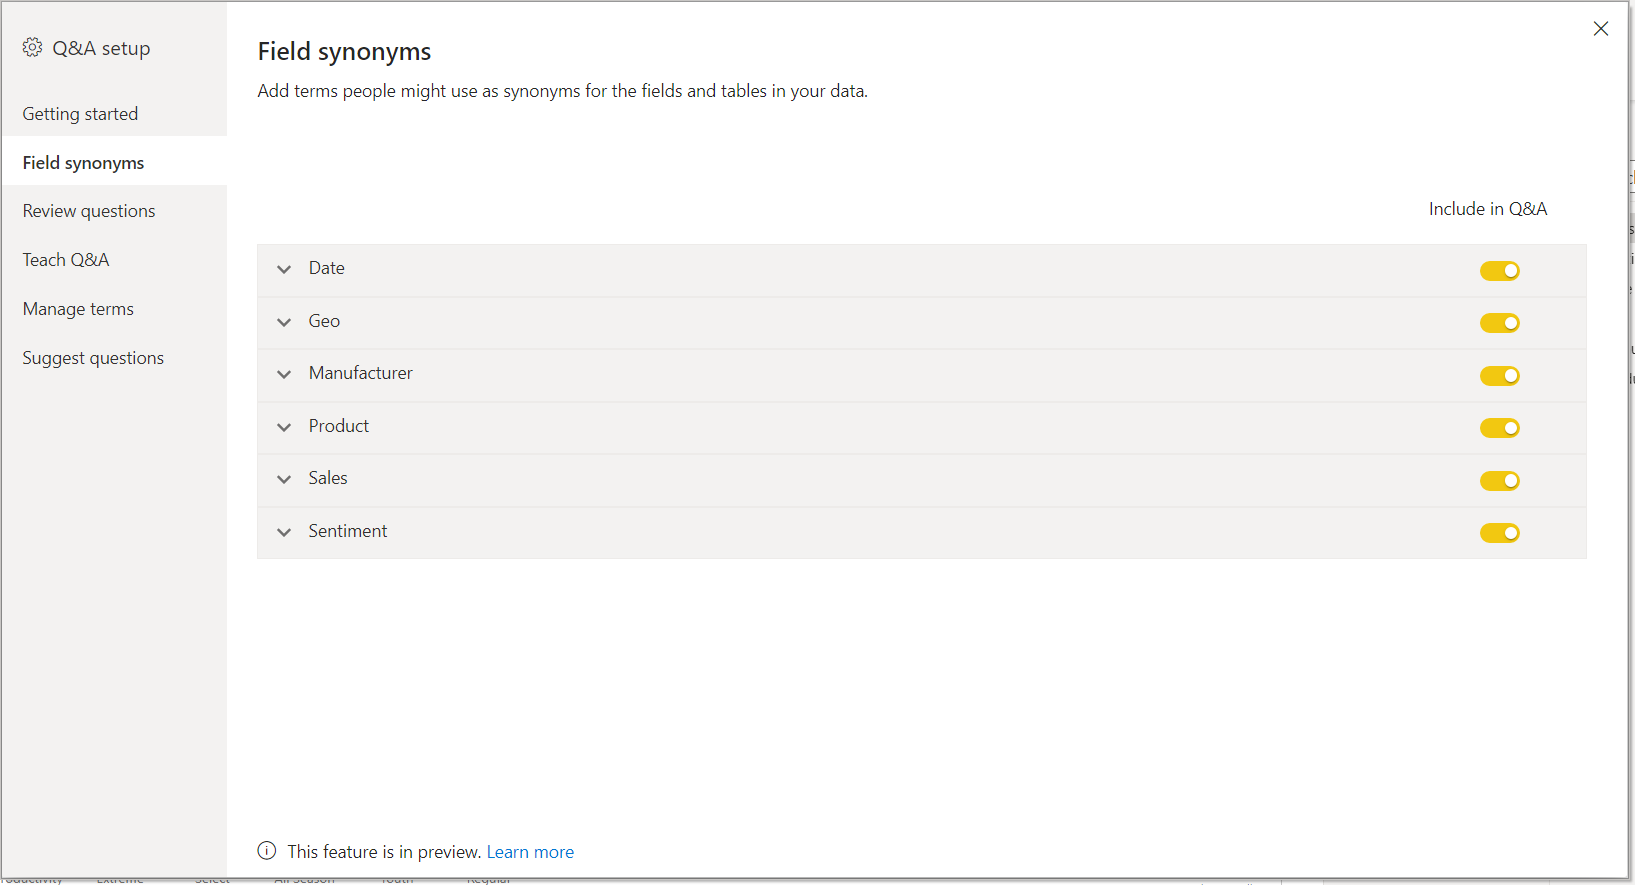 Screenshot of the Q and A Field synonyms page.